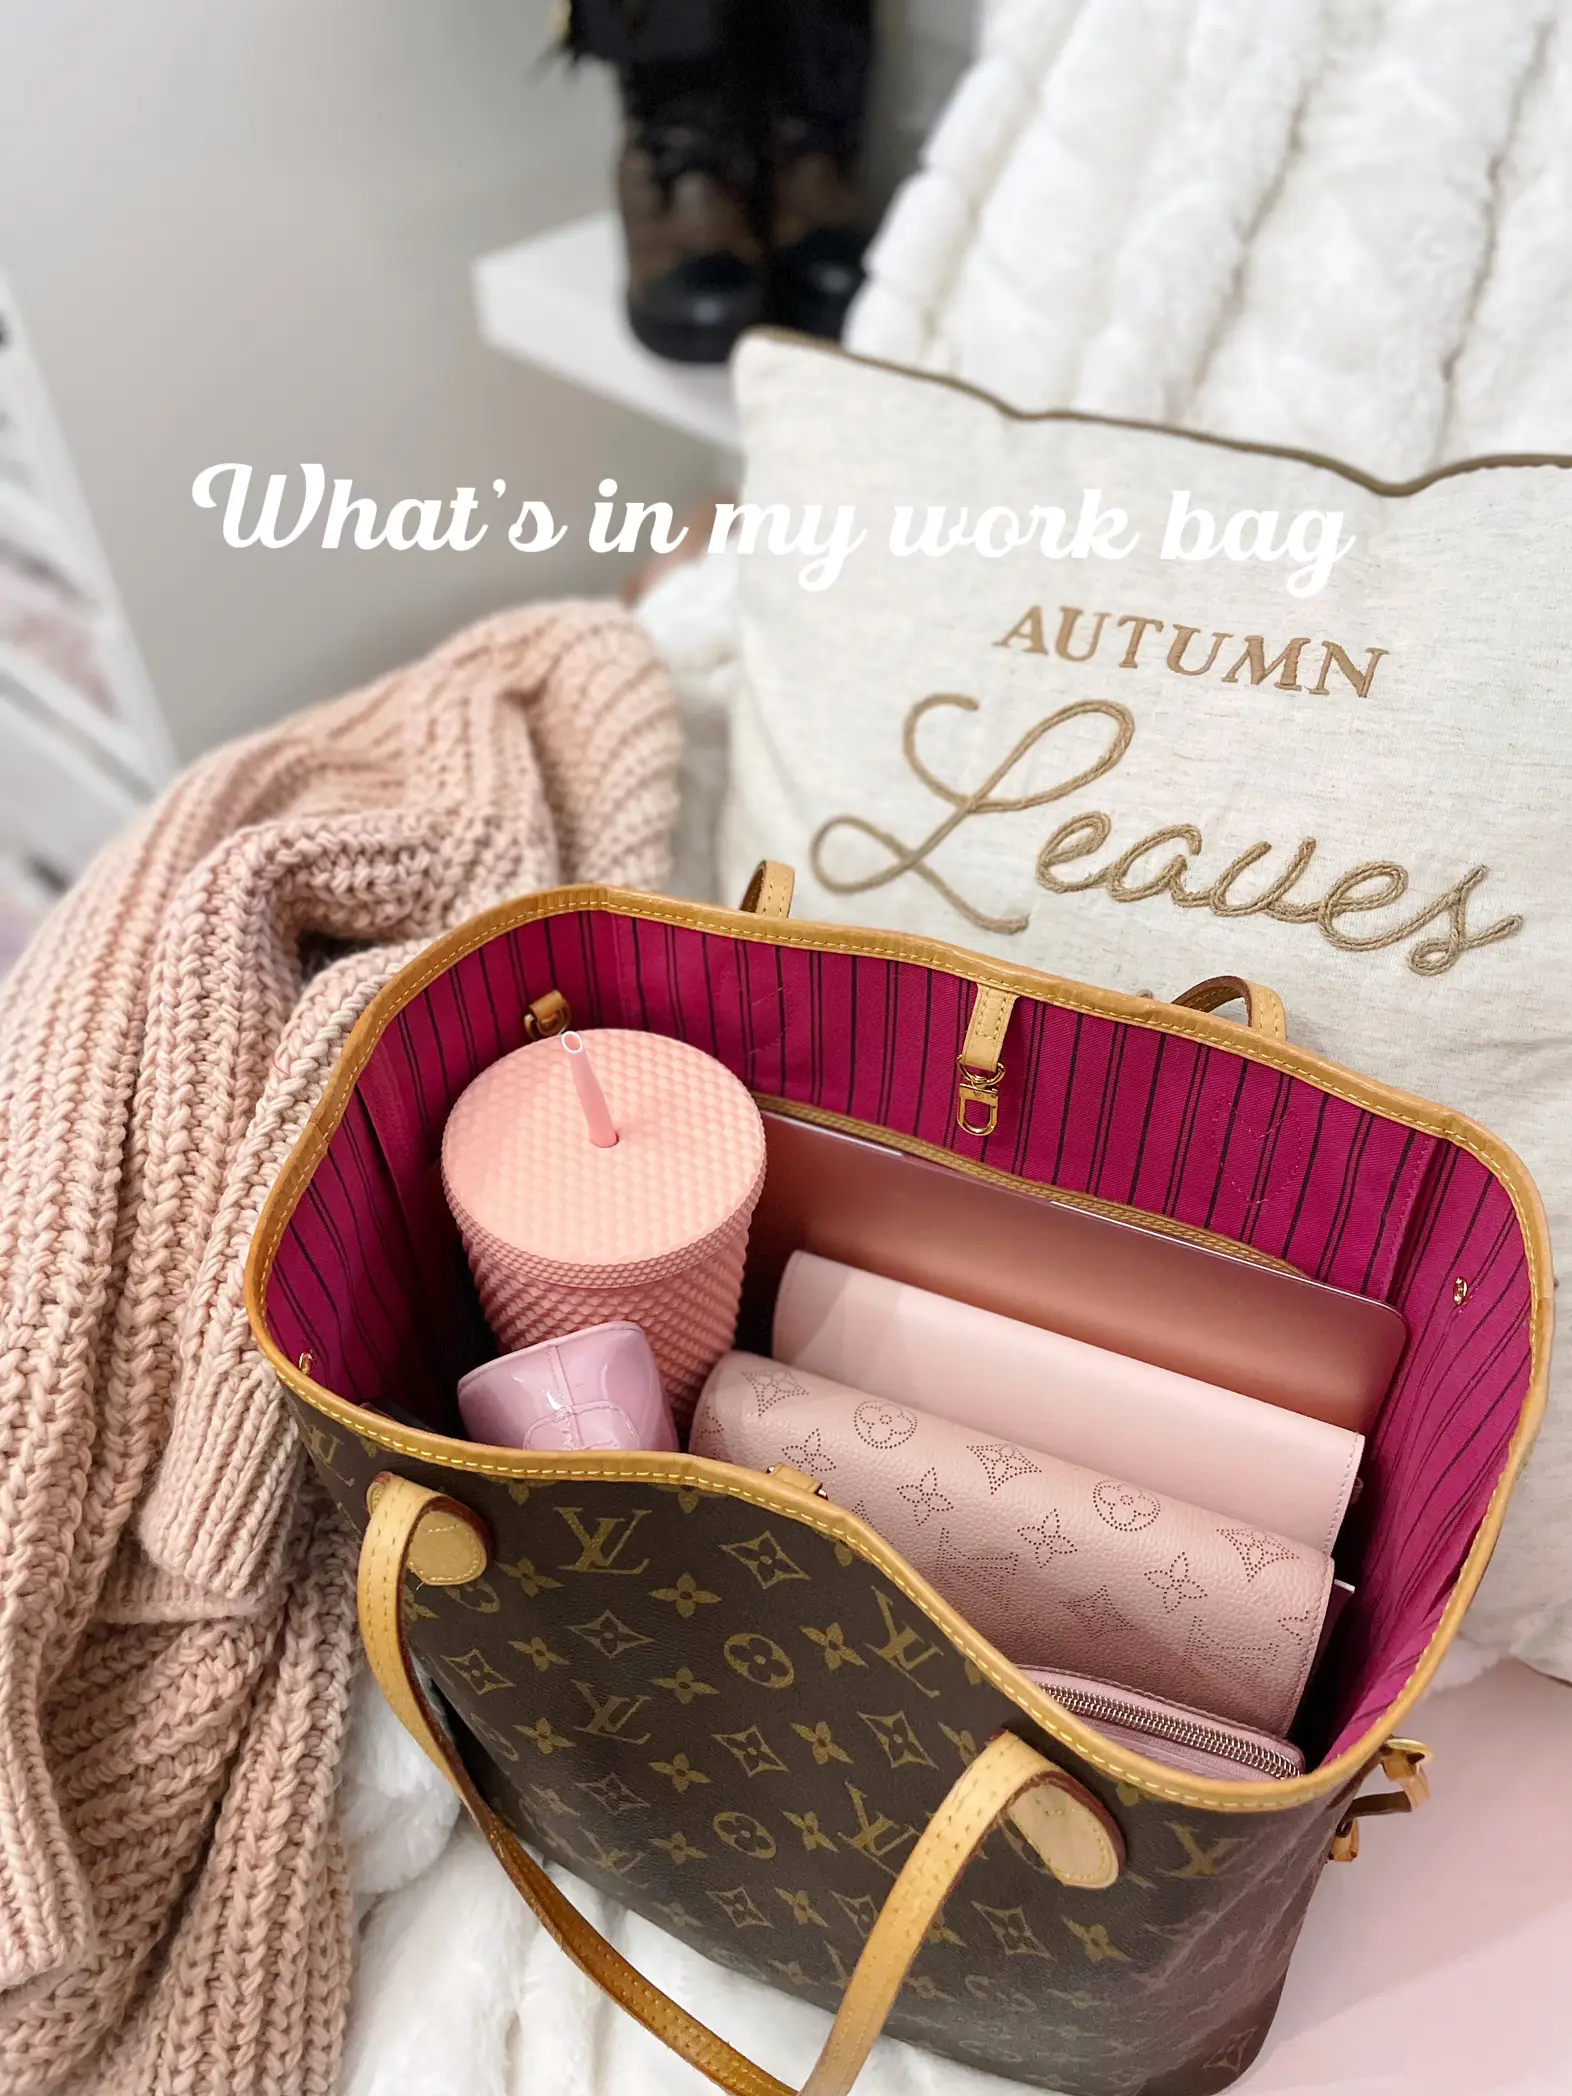 What's in my bag, Gallery posted by Chevonne Dixon